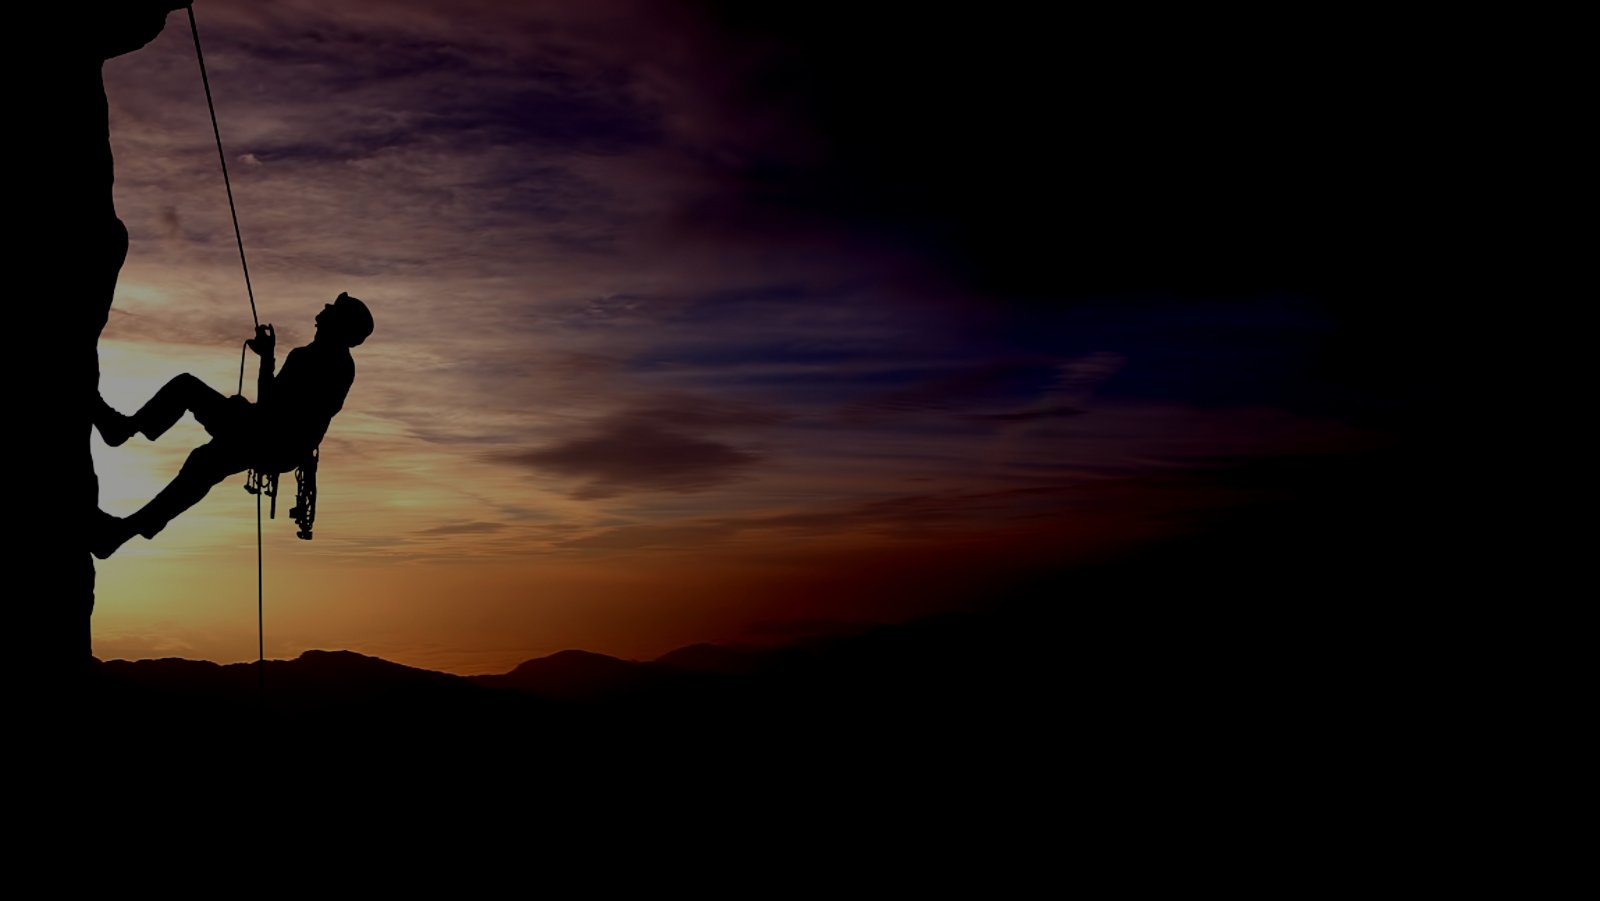 Silhouette of a climber on a vertical wall over beautiful sunset